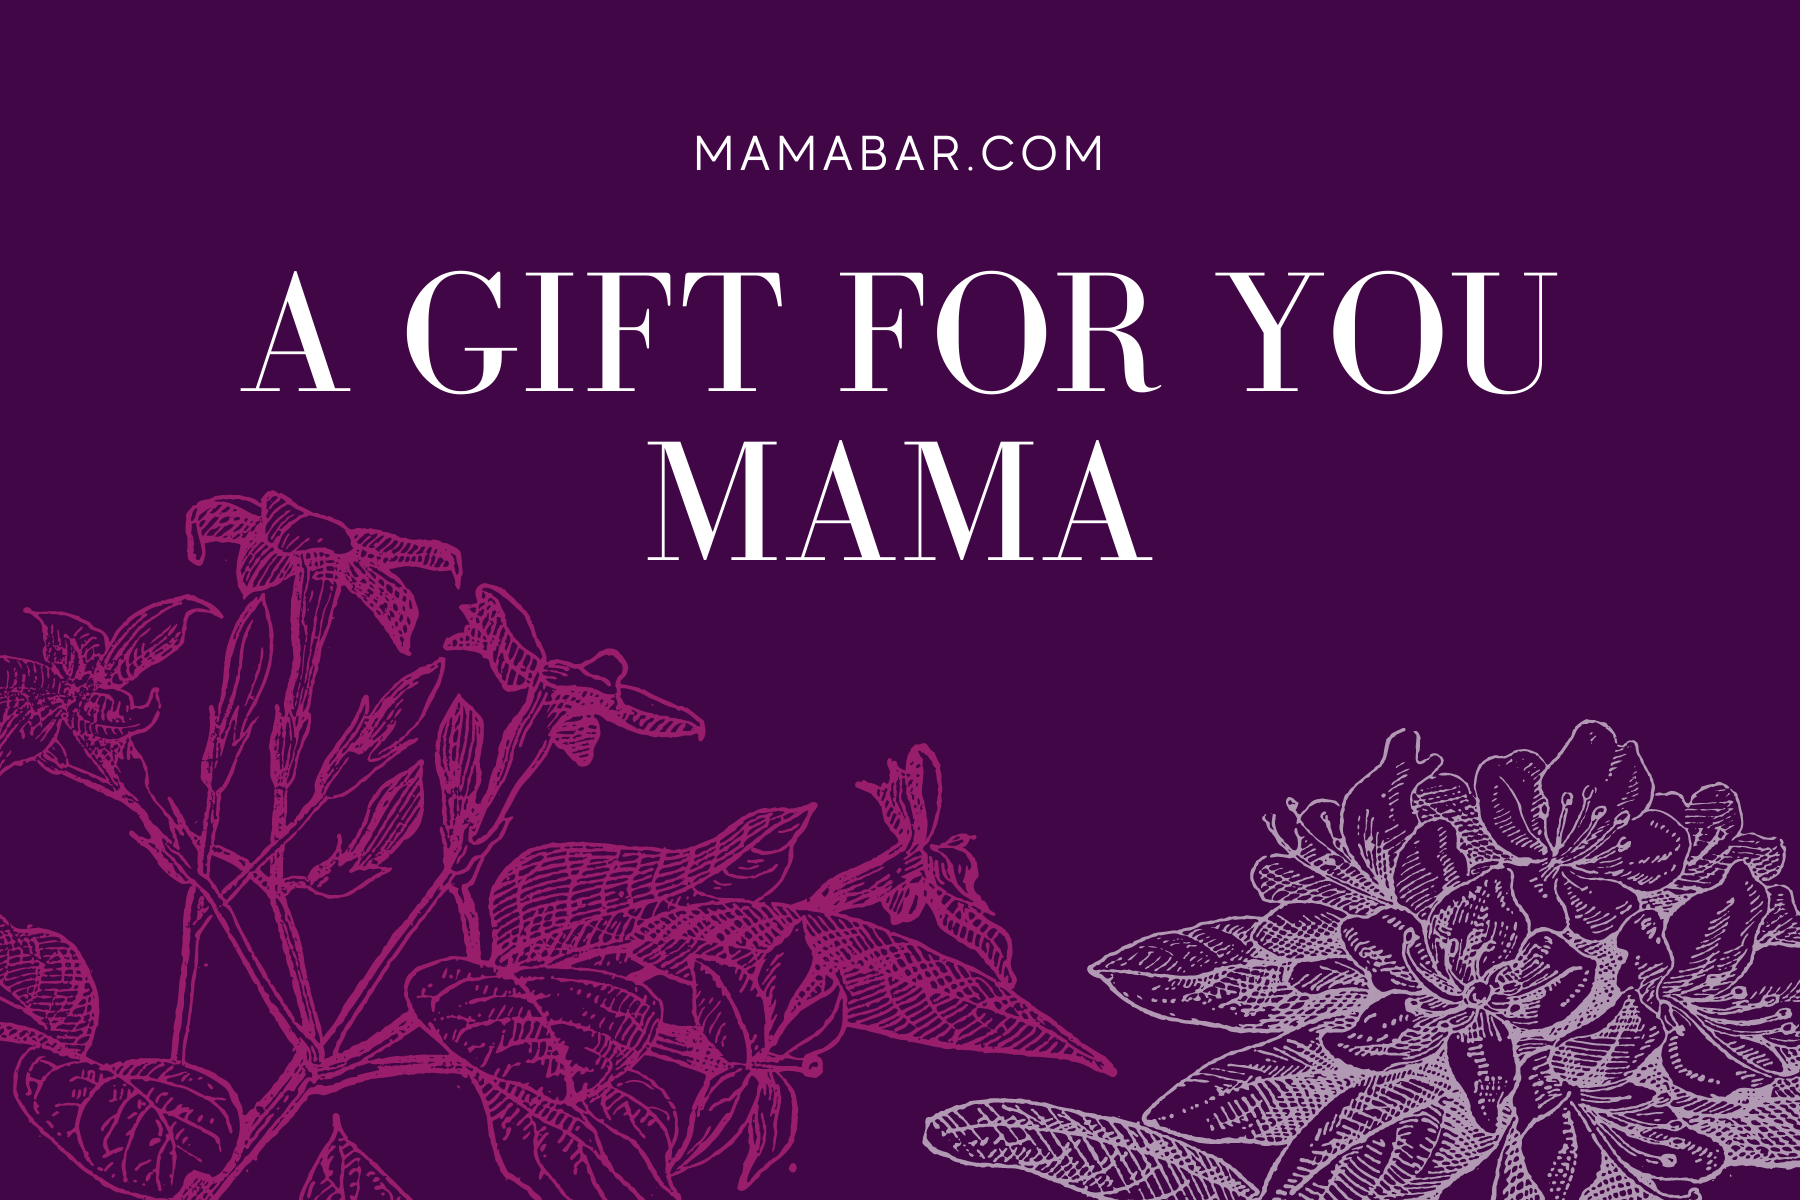 A gift for Mama